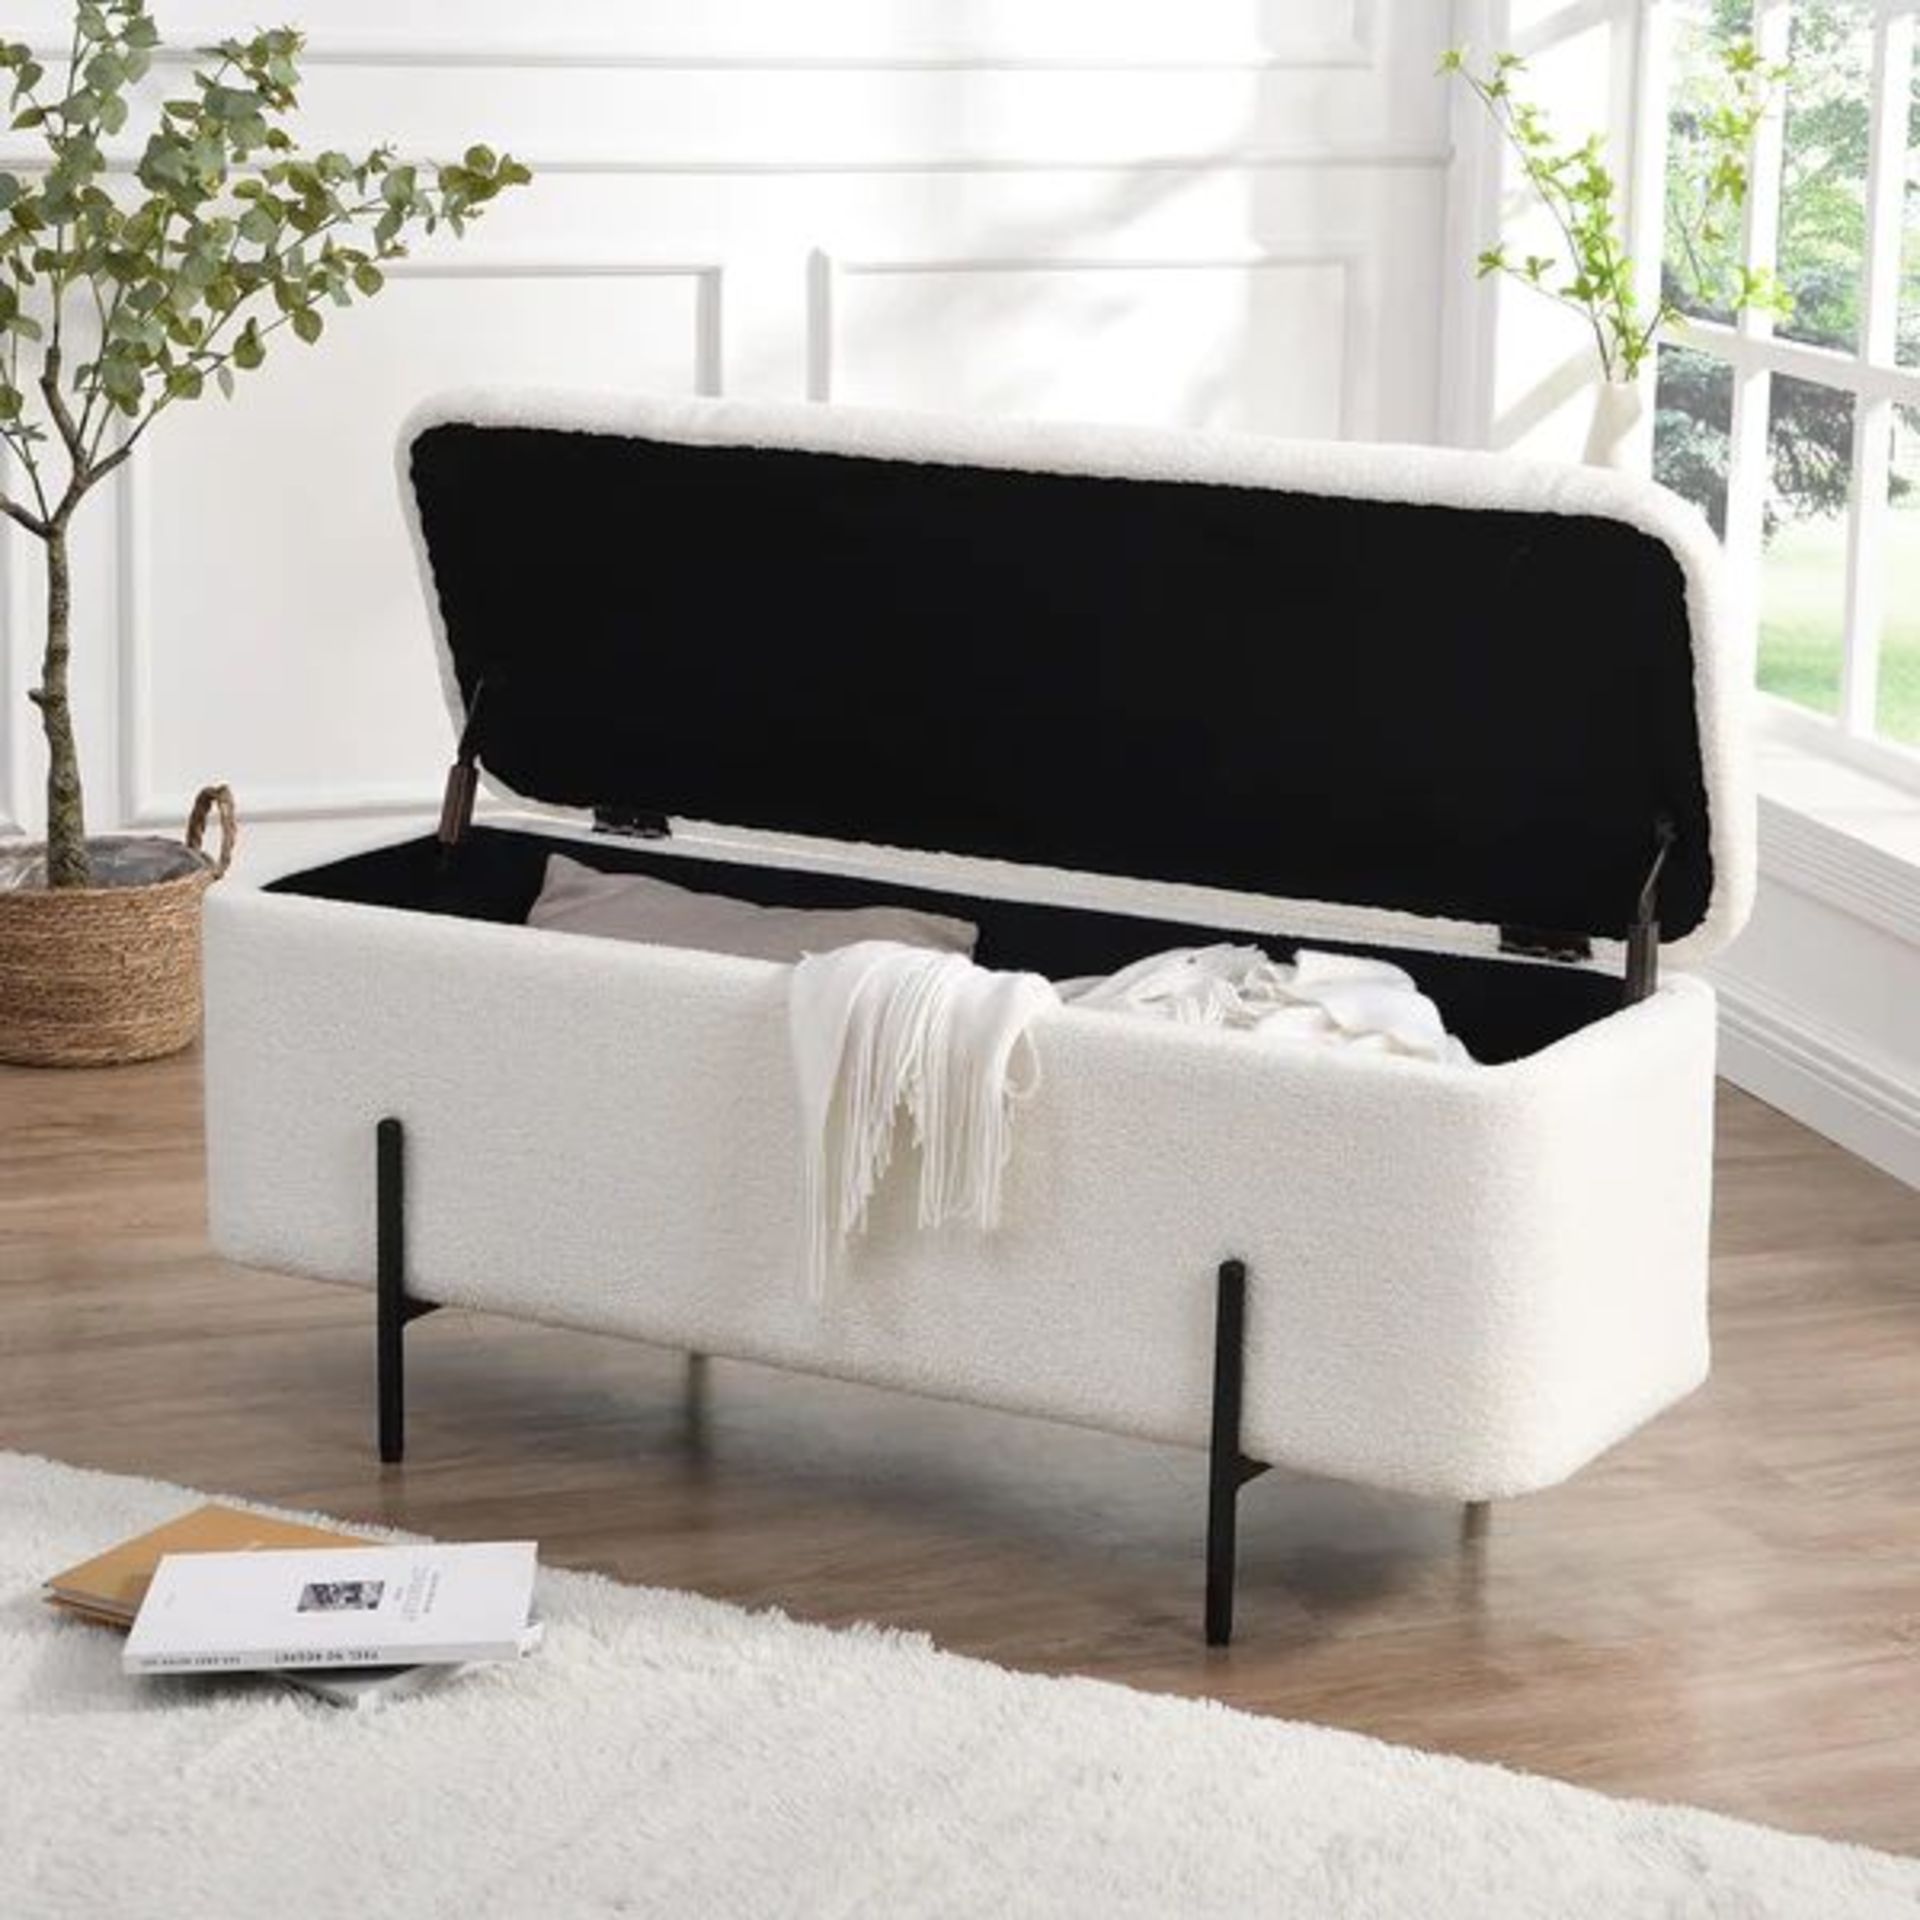 Jed Ecru Boucle 120cm Large Storage Ottoman Bench. - ER31. RRP £199.99. Upholstered in cosy teddy - Bild 2 aus 2